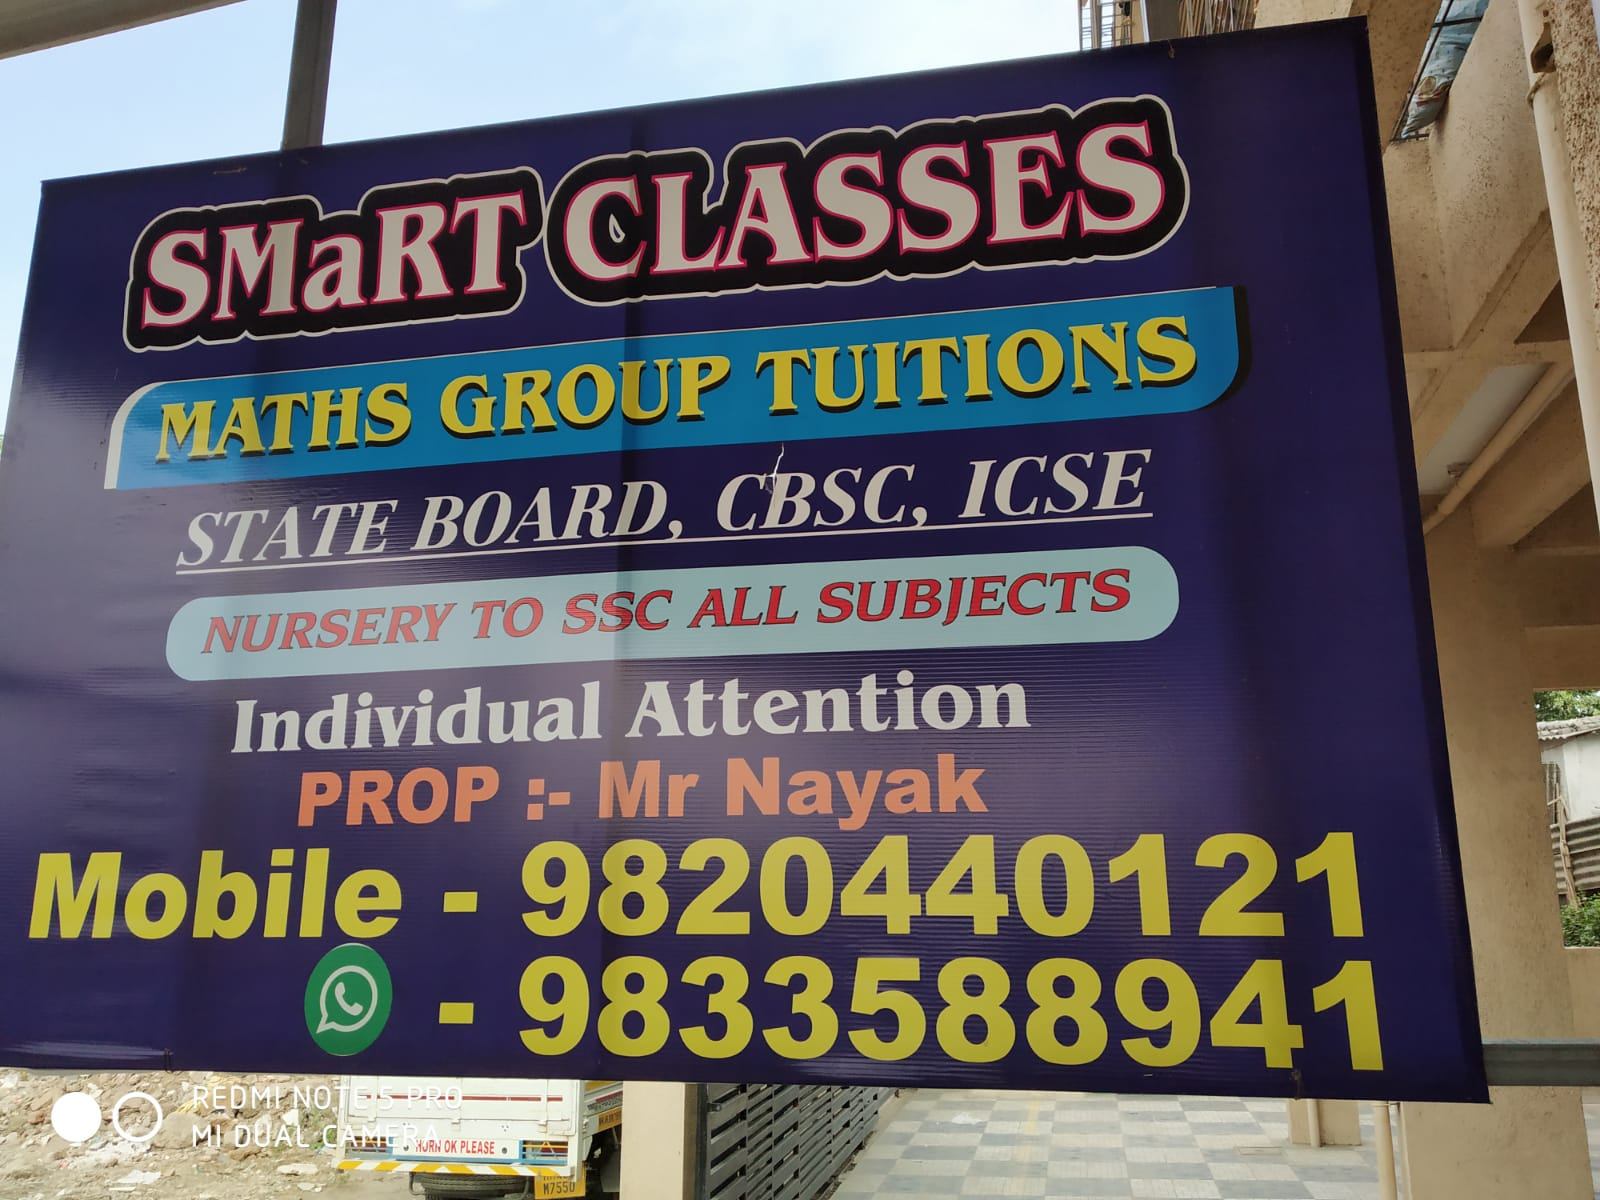 Chemistry, Class 11th/ 12th Tuition, Class 9th/ 10th Tuition, Elementary (Class 1 - 5 Tuition), English; Exp: More than 15 year